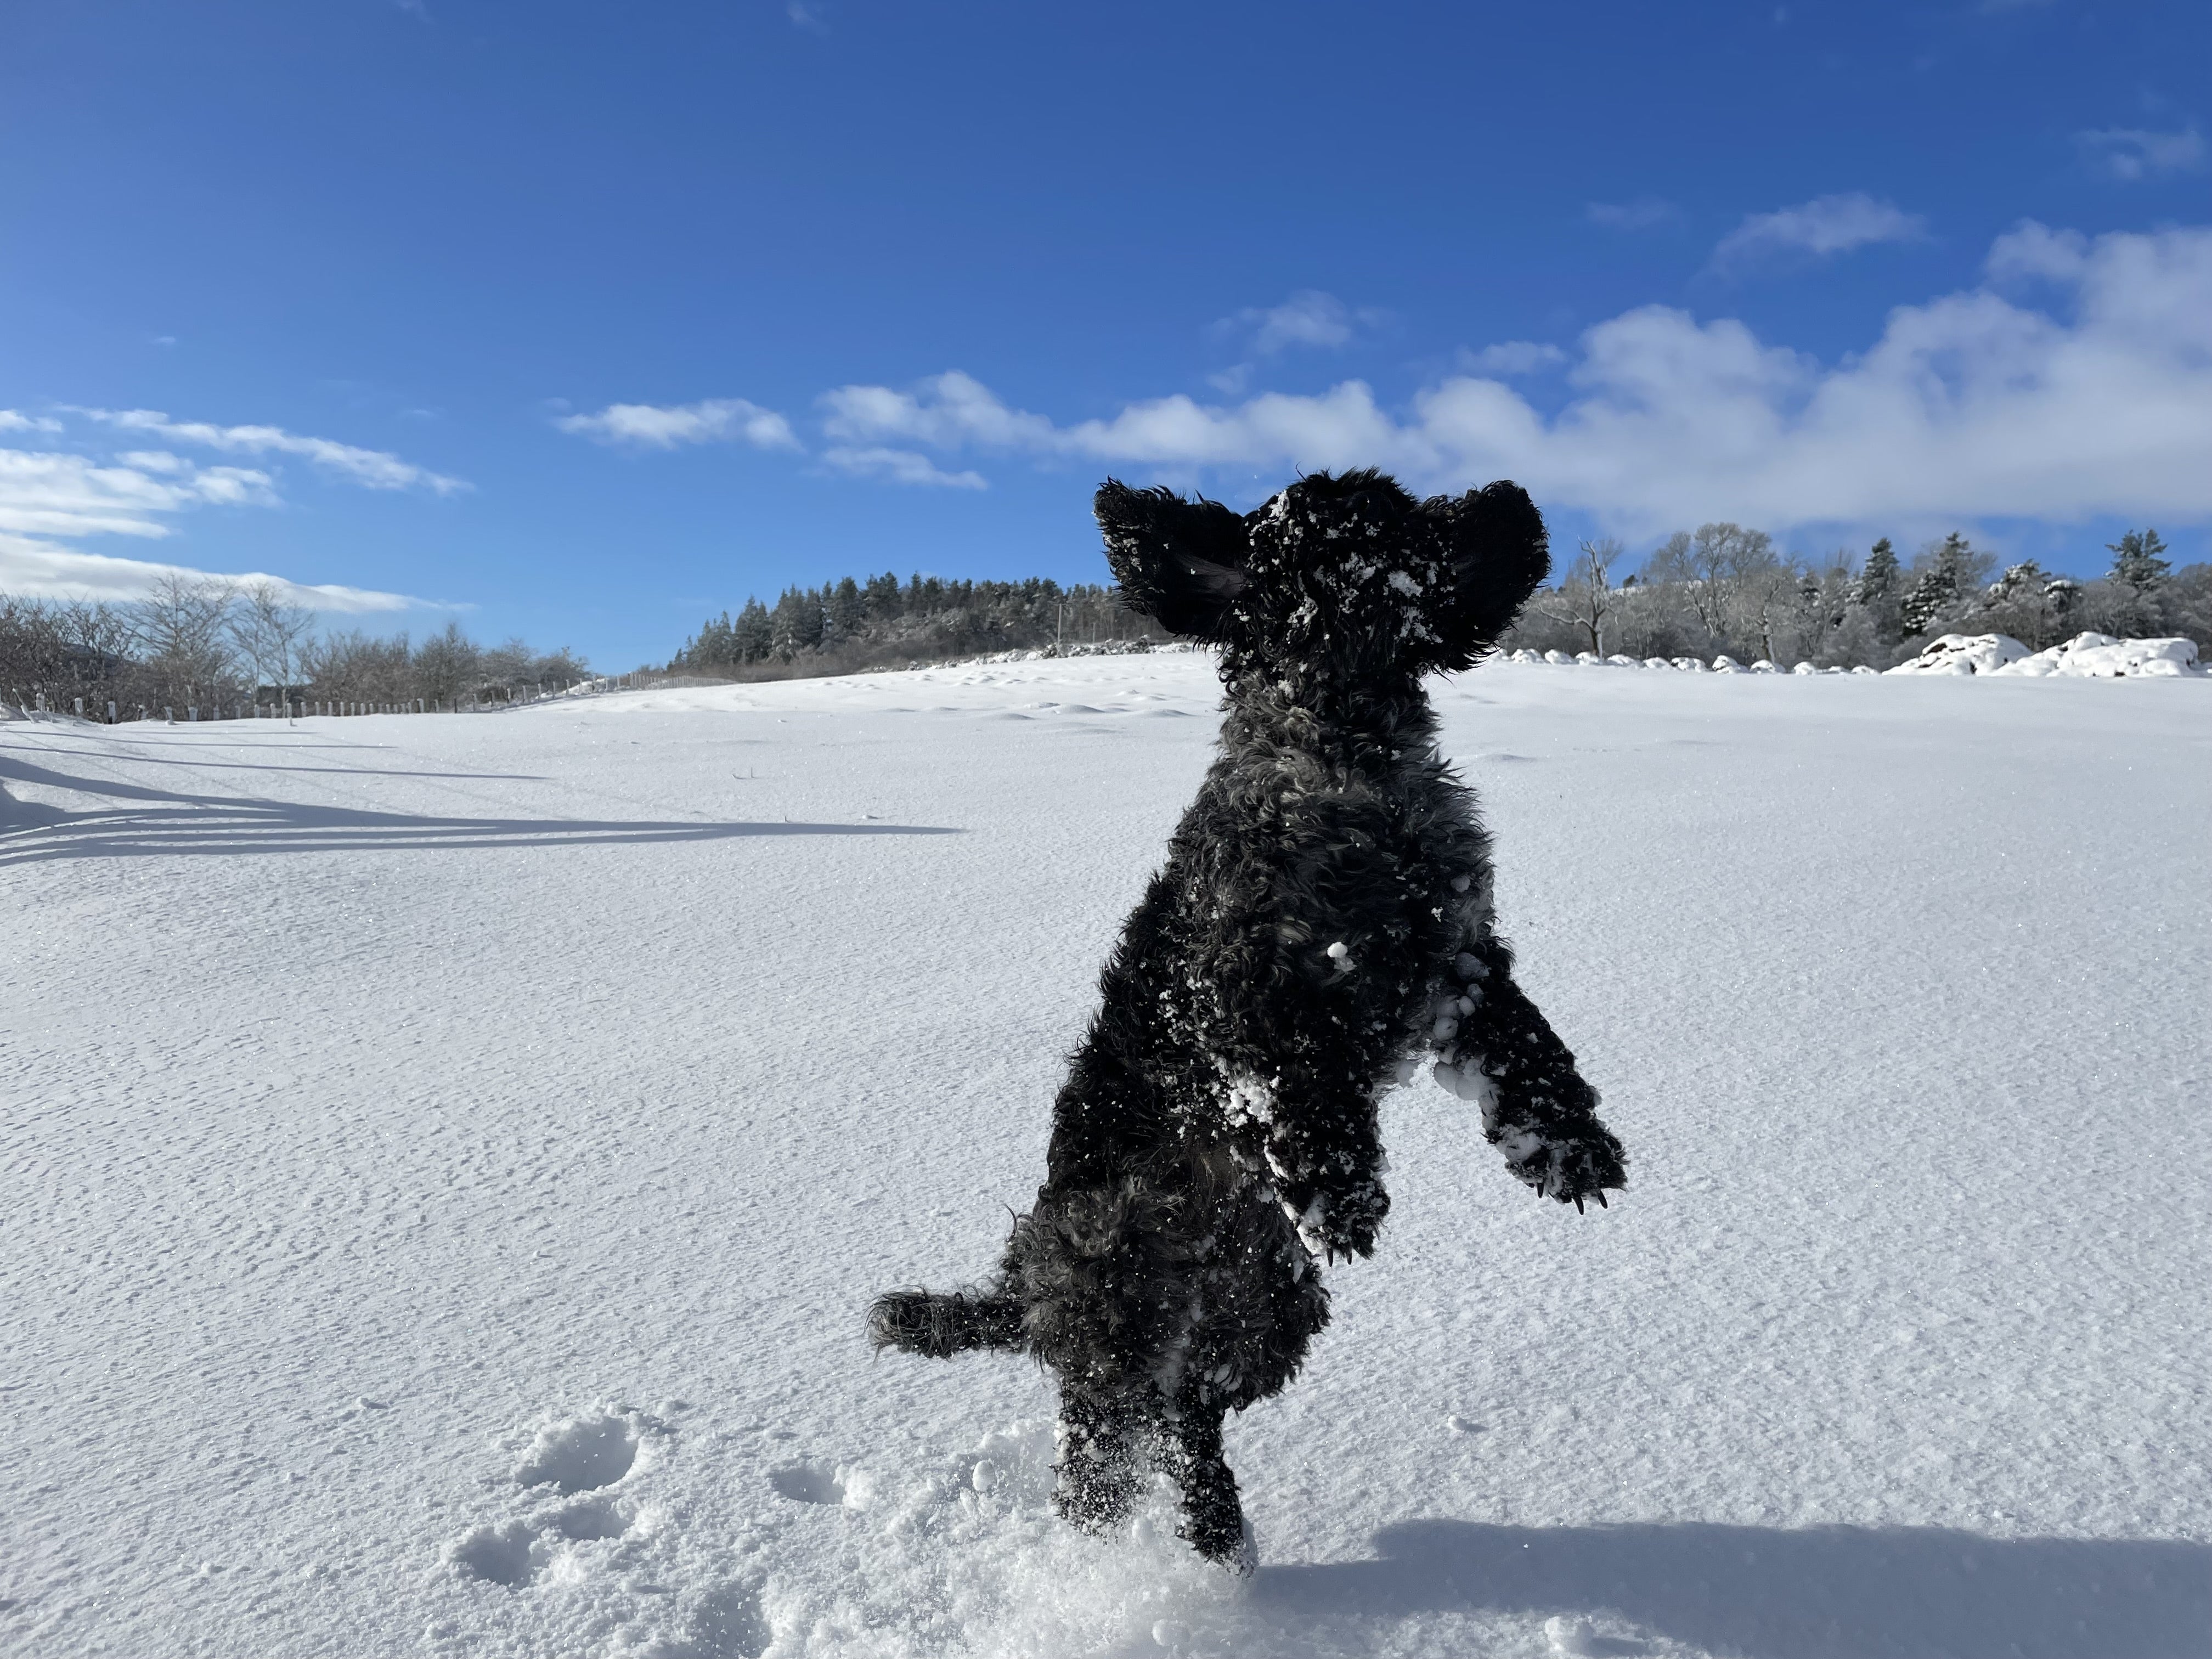 Poppy has fun in Huntly, Aberdeenshire, after Storm Eunice brought heavy snowfall to parts of Scotland